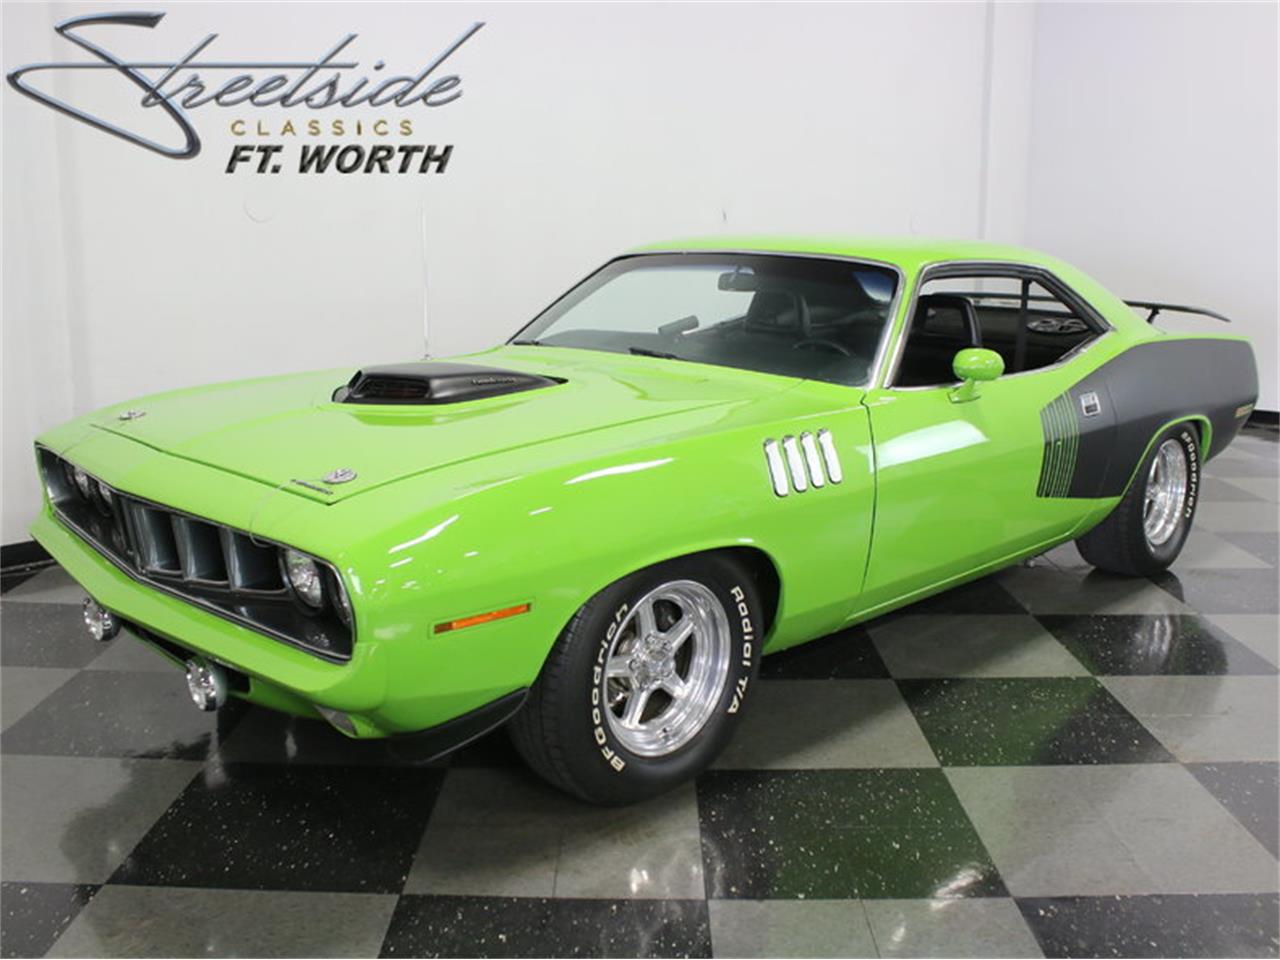 Cuda is available. Plymouth Barracuda 1973. Plymouth Hemi CUDA 1973. Plymouth Hemi CUDA. Plymouth Barracuda Hemi.